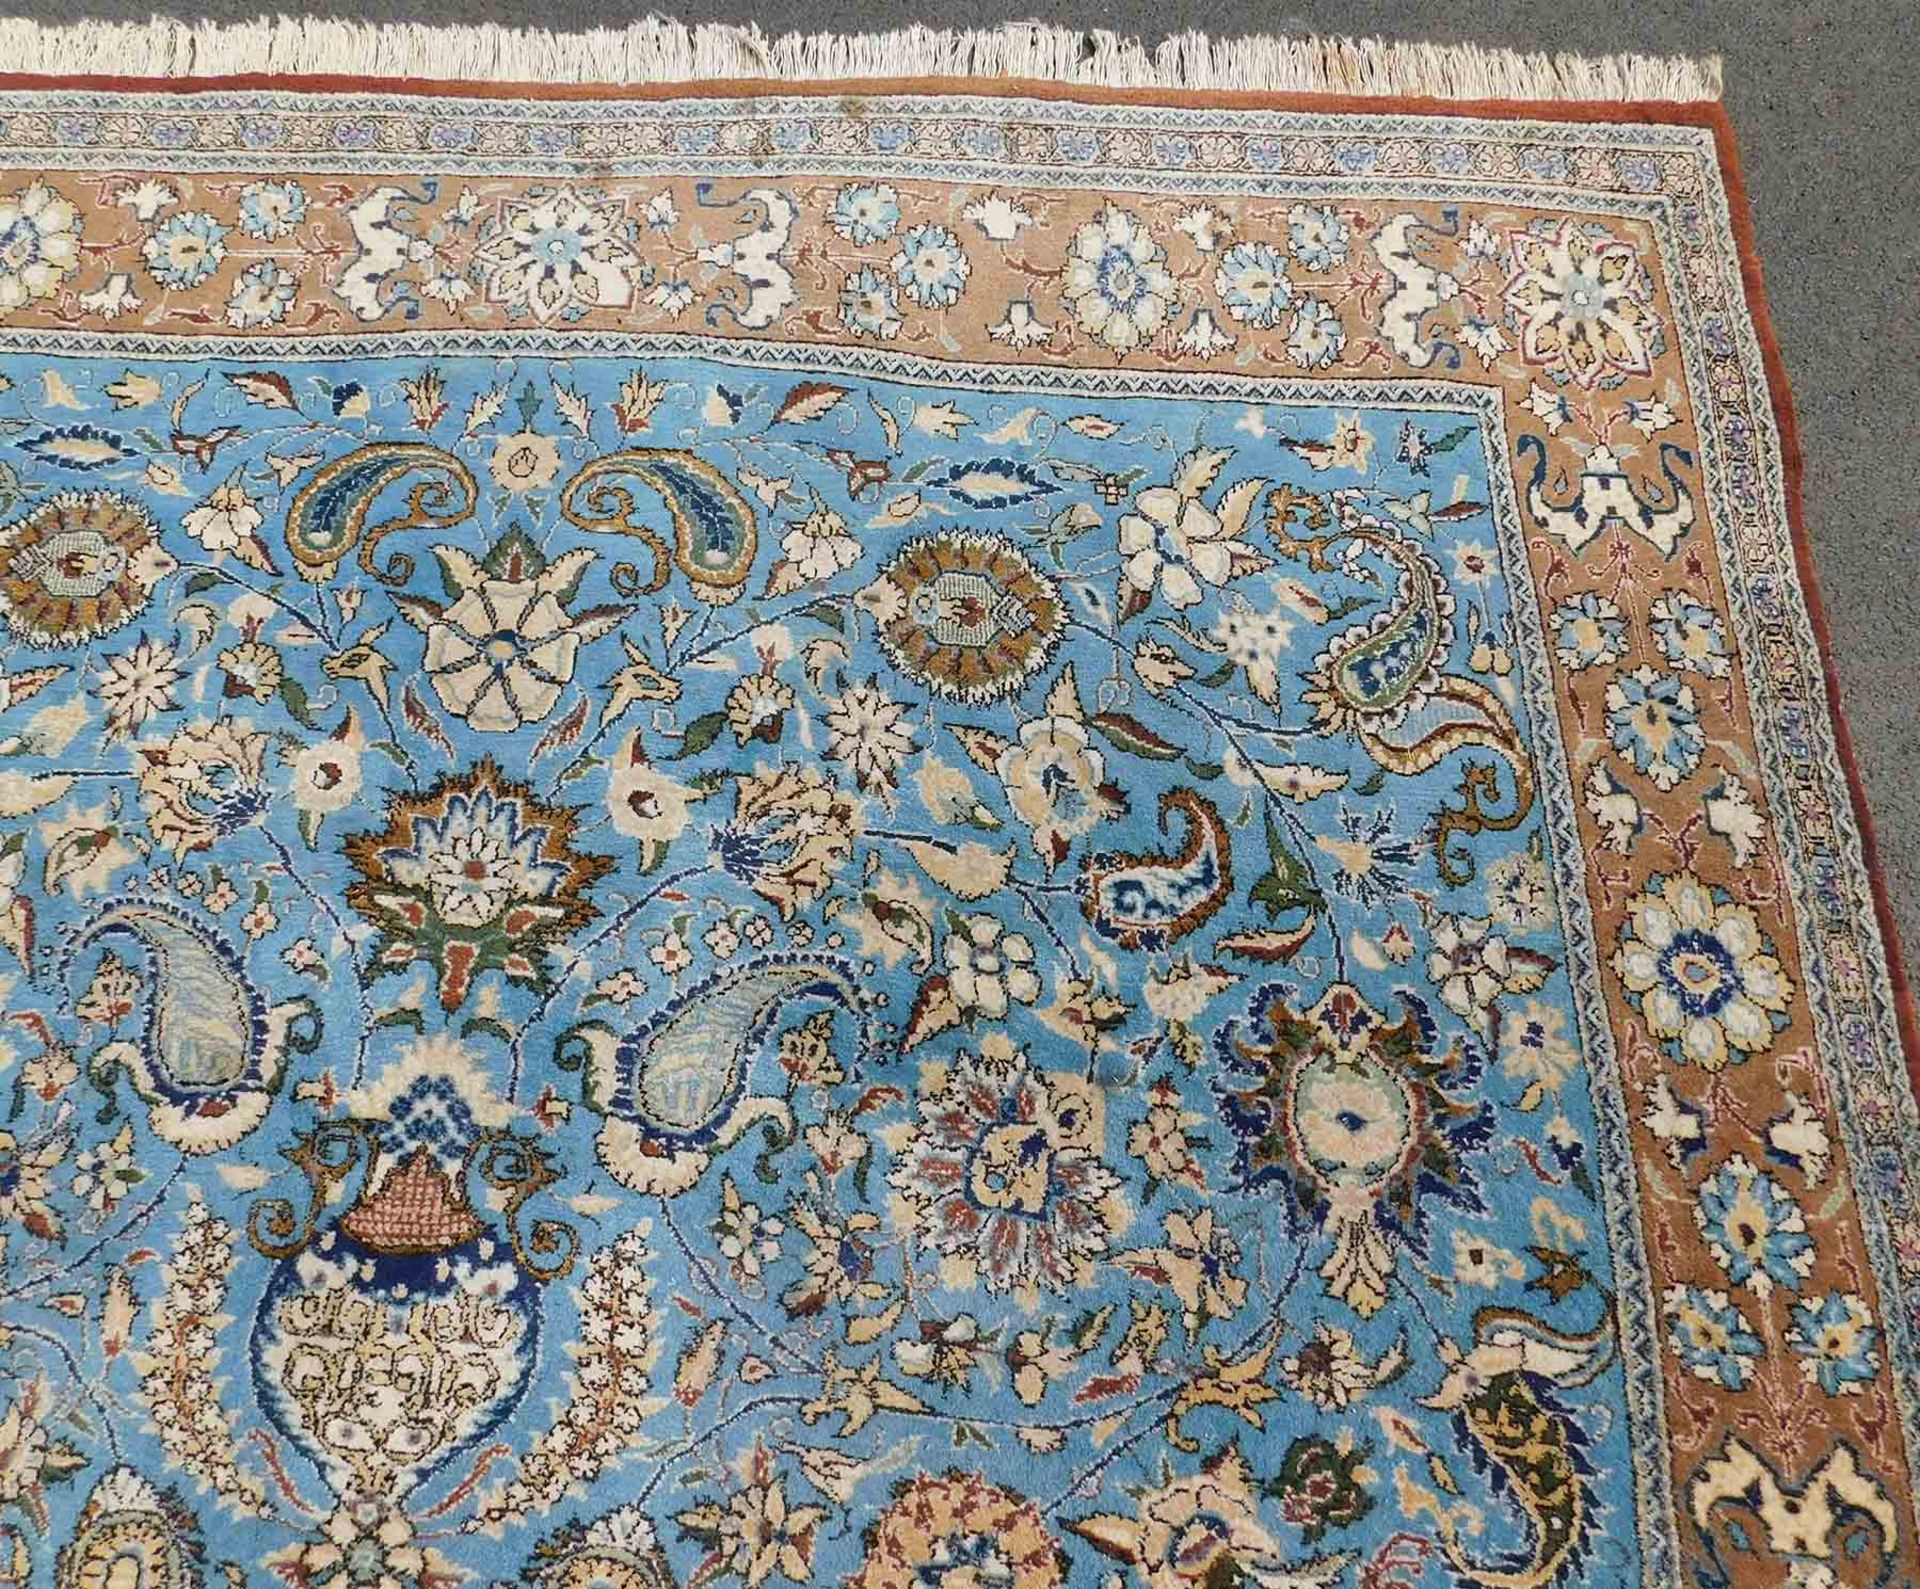 Ghum Persian rug. Iran. Very fine weave. Old, mid 20th century.333 cm x 211 cm. Knotted by hand. - Image 5 of 8